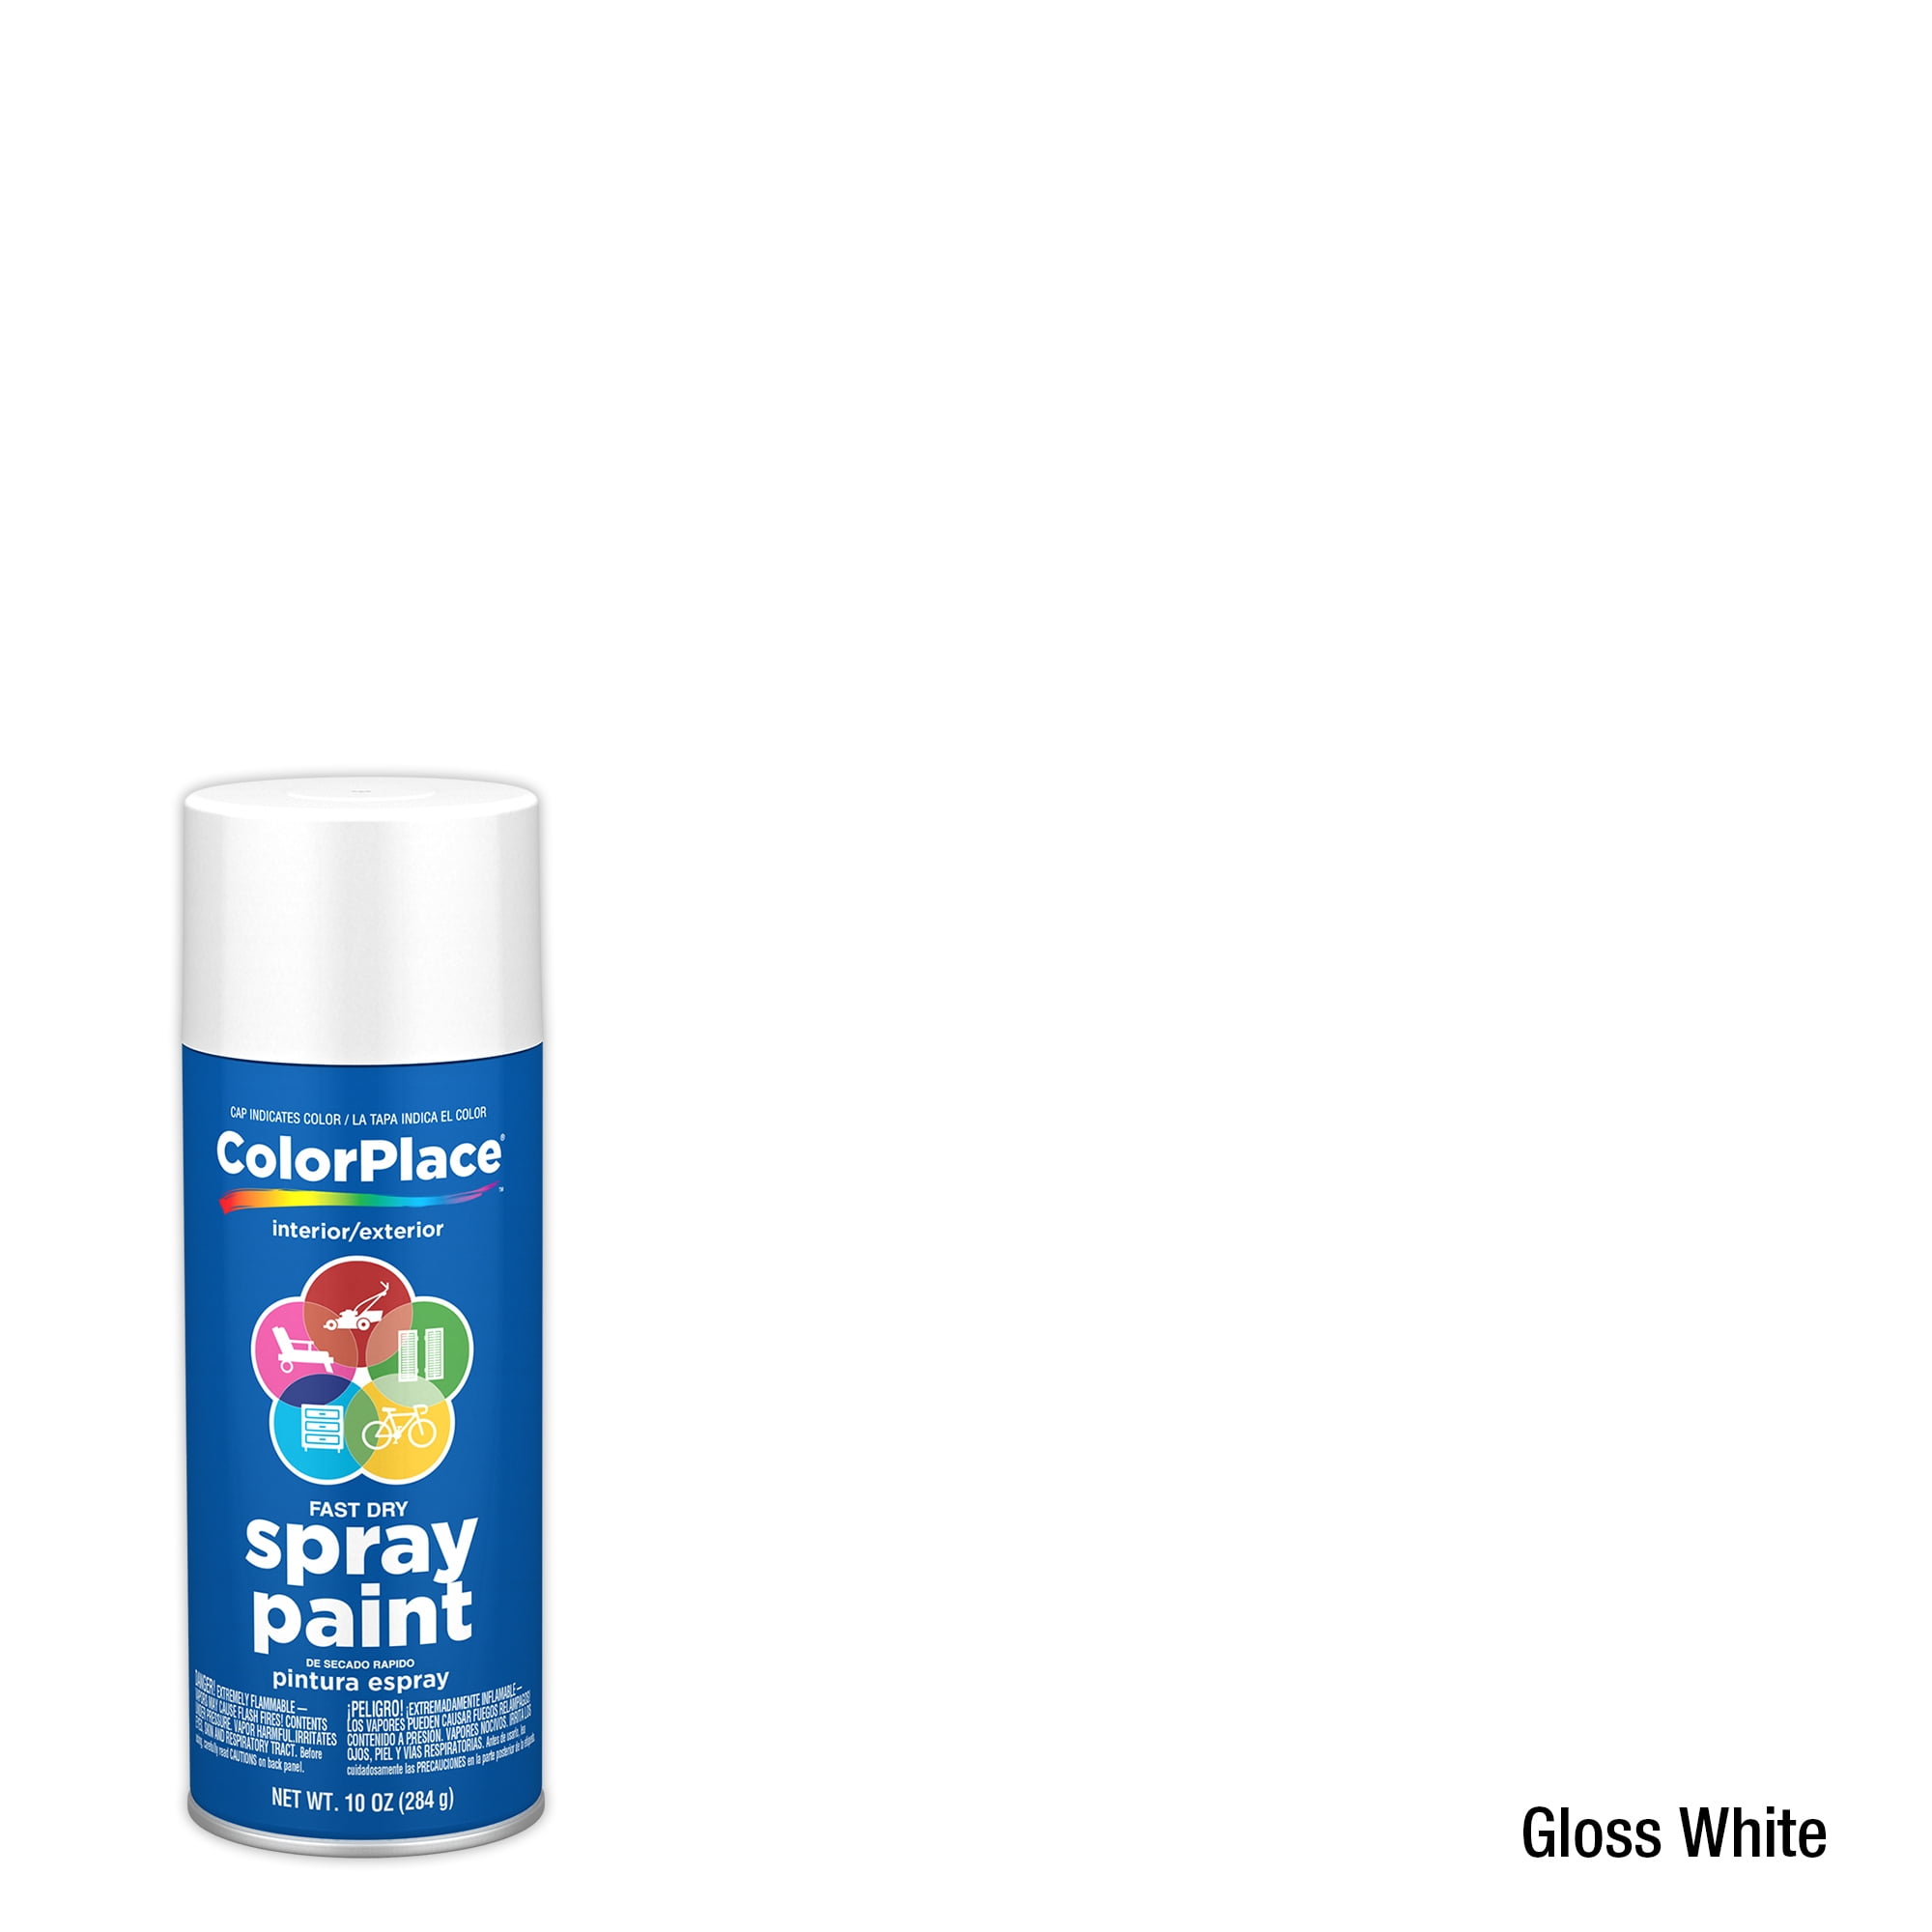 ColorPlace Gloss Spray Paint, White